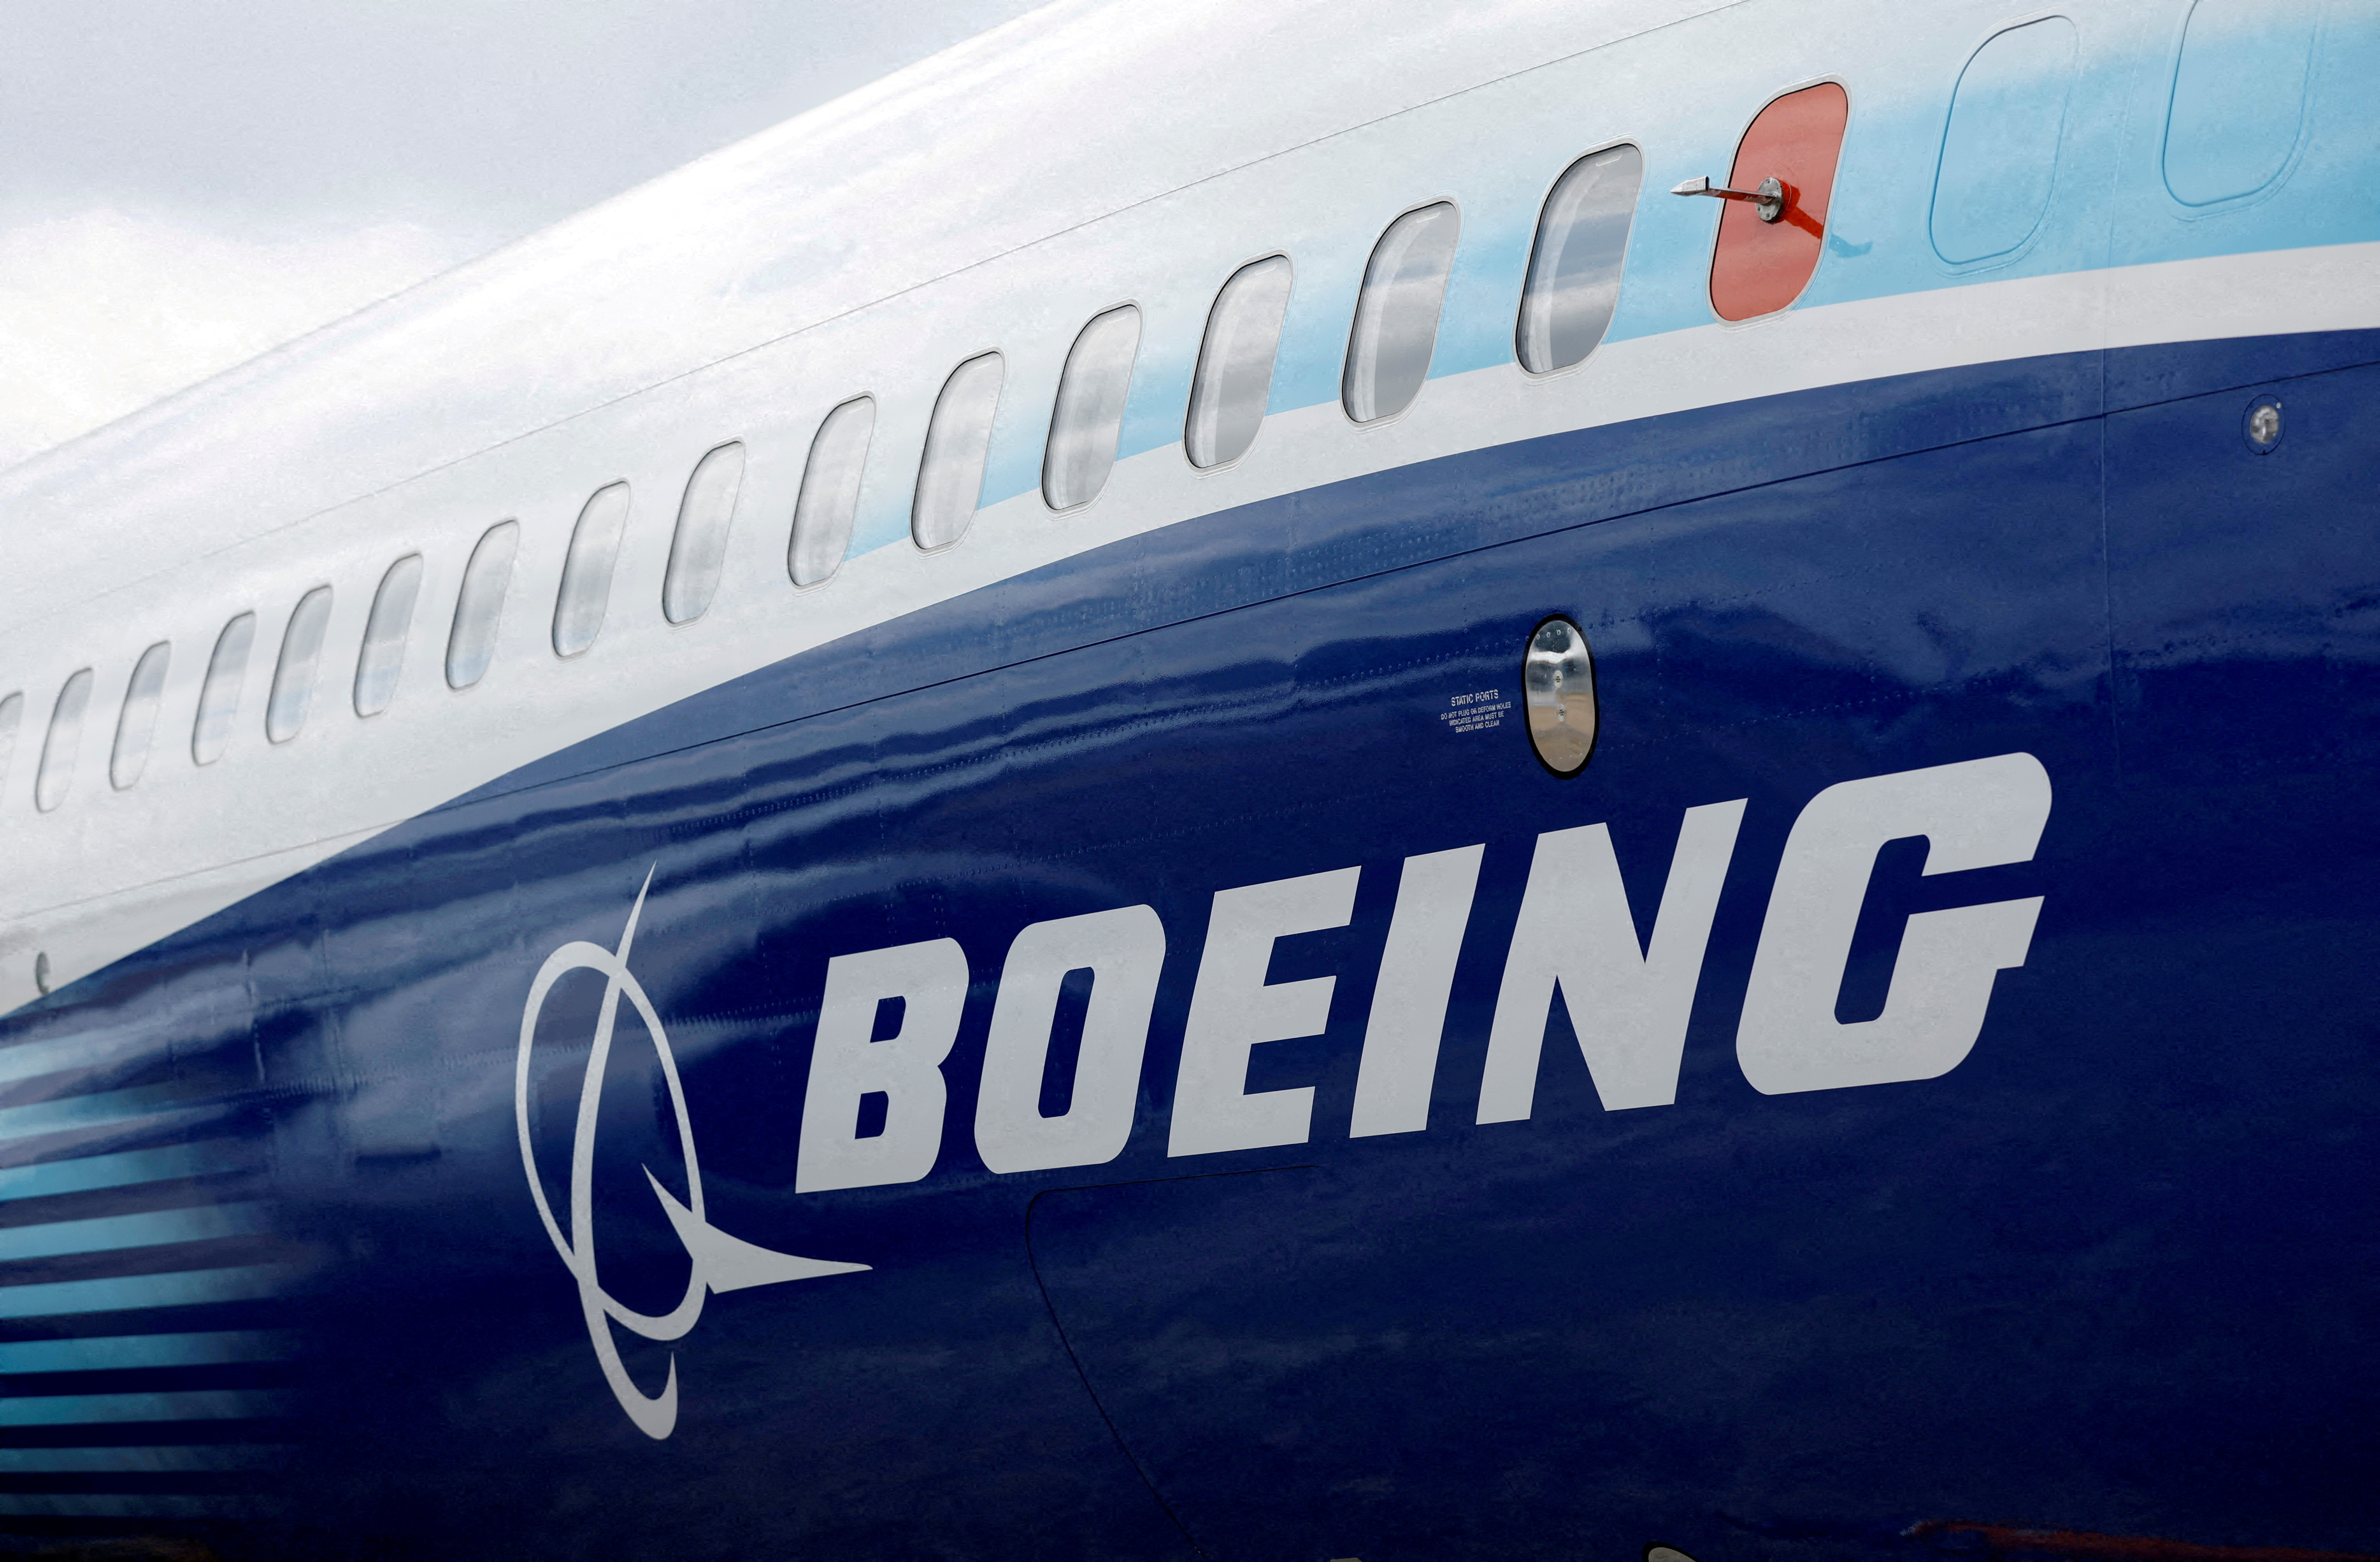 The Boeing logo is seen on the side of a Boeing 737 MAX at the Farnborough International Airshow